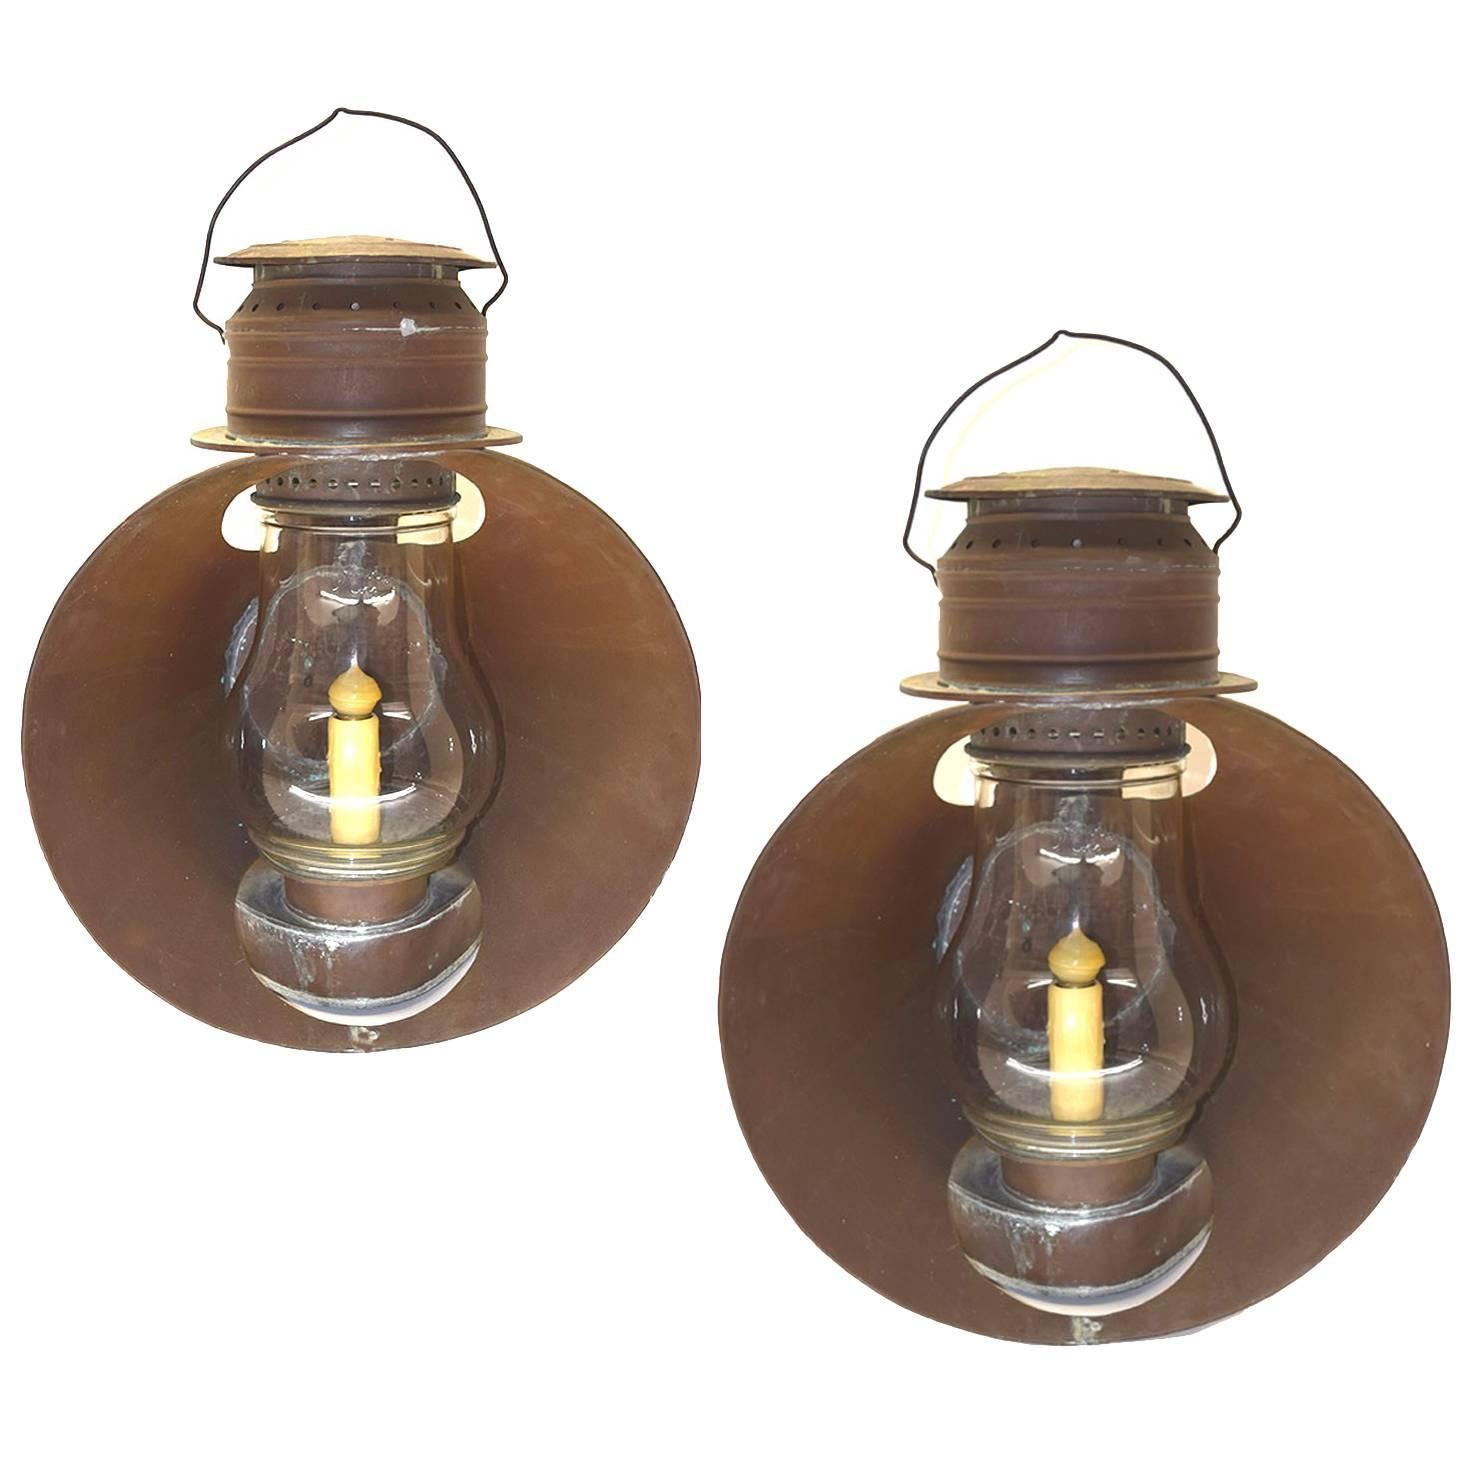 Pair of Antique American Solid Copper Ships Lanterns, circa 1890-1910 For Sale